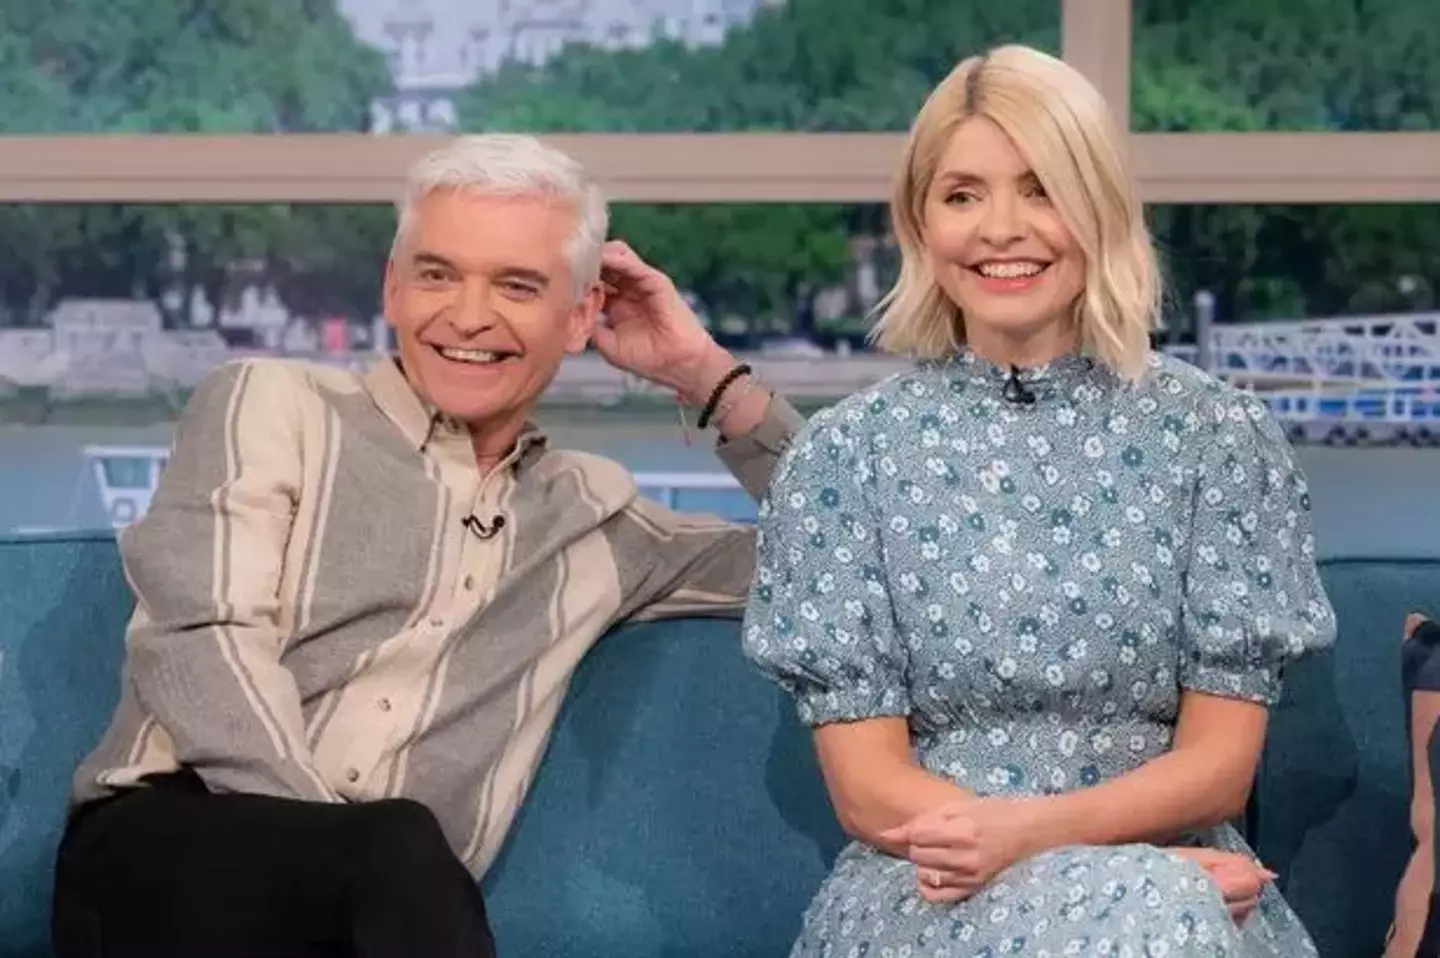 Phillip Schofield left This Morning in May.